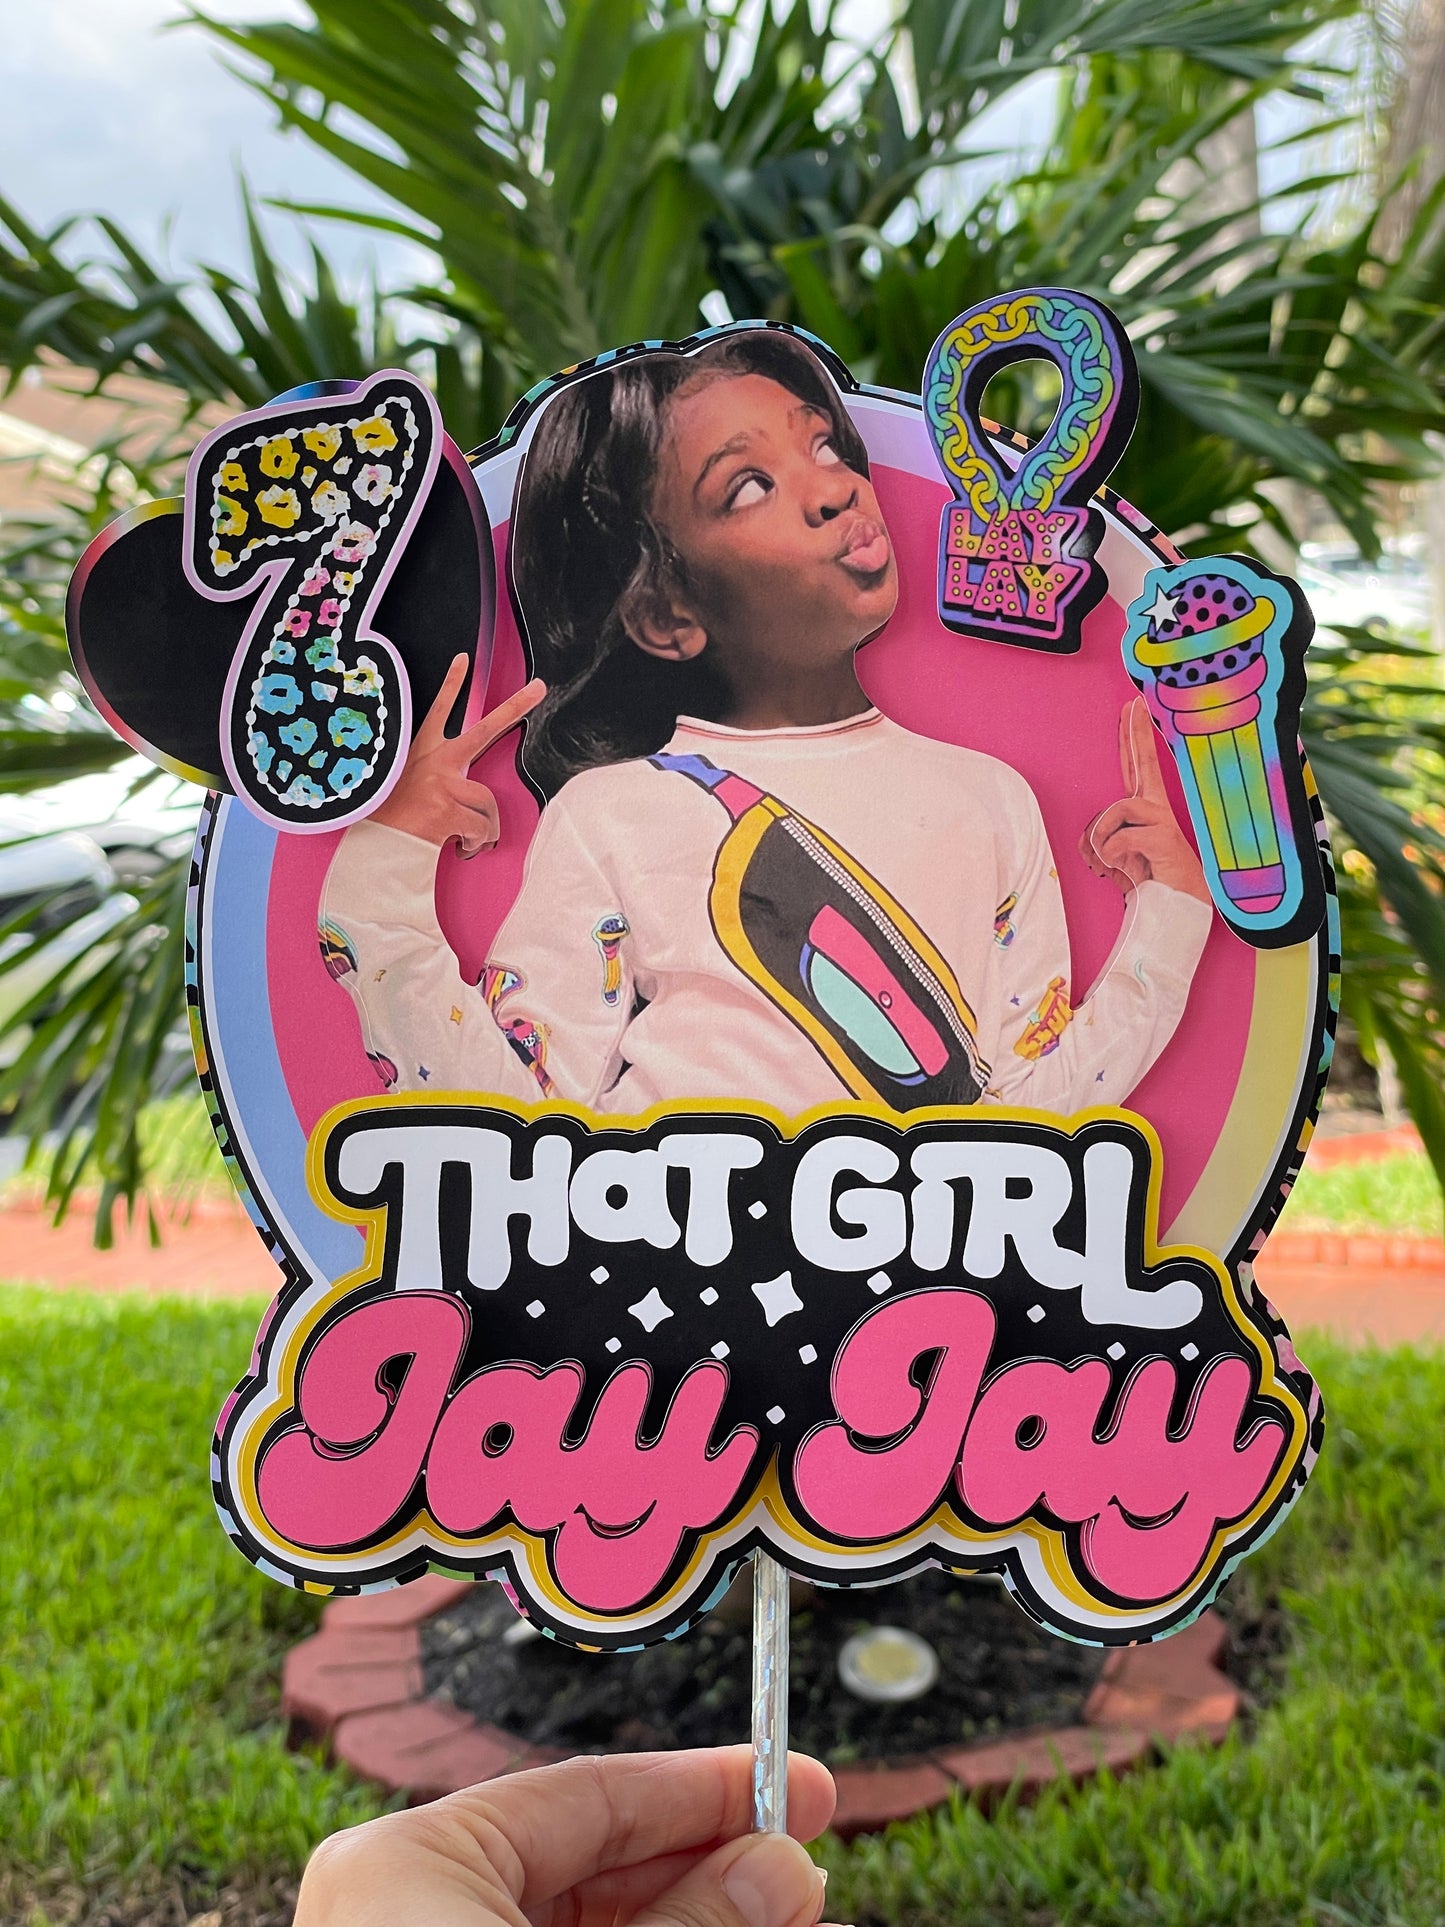 That Girl Lay Lay Cake topper